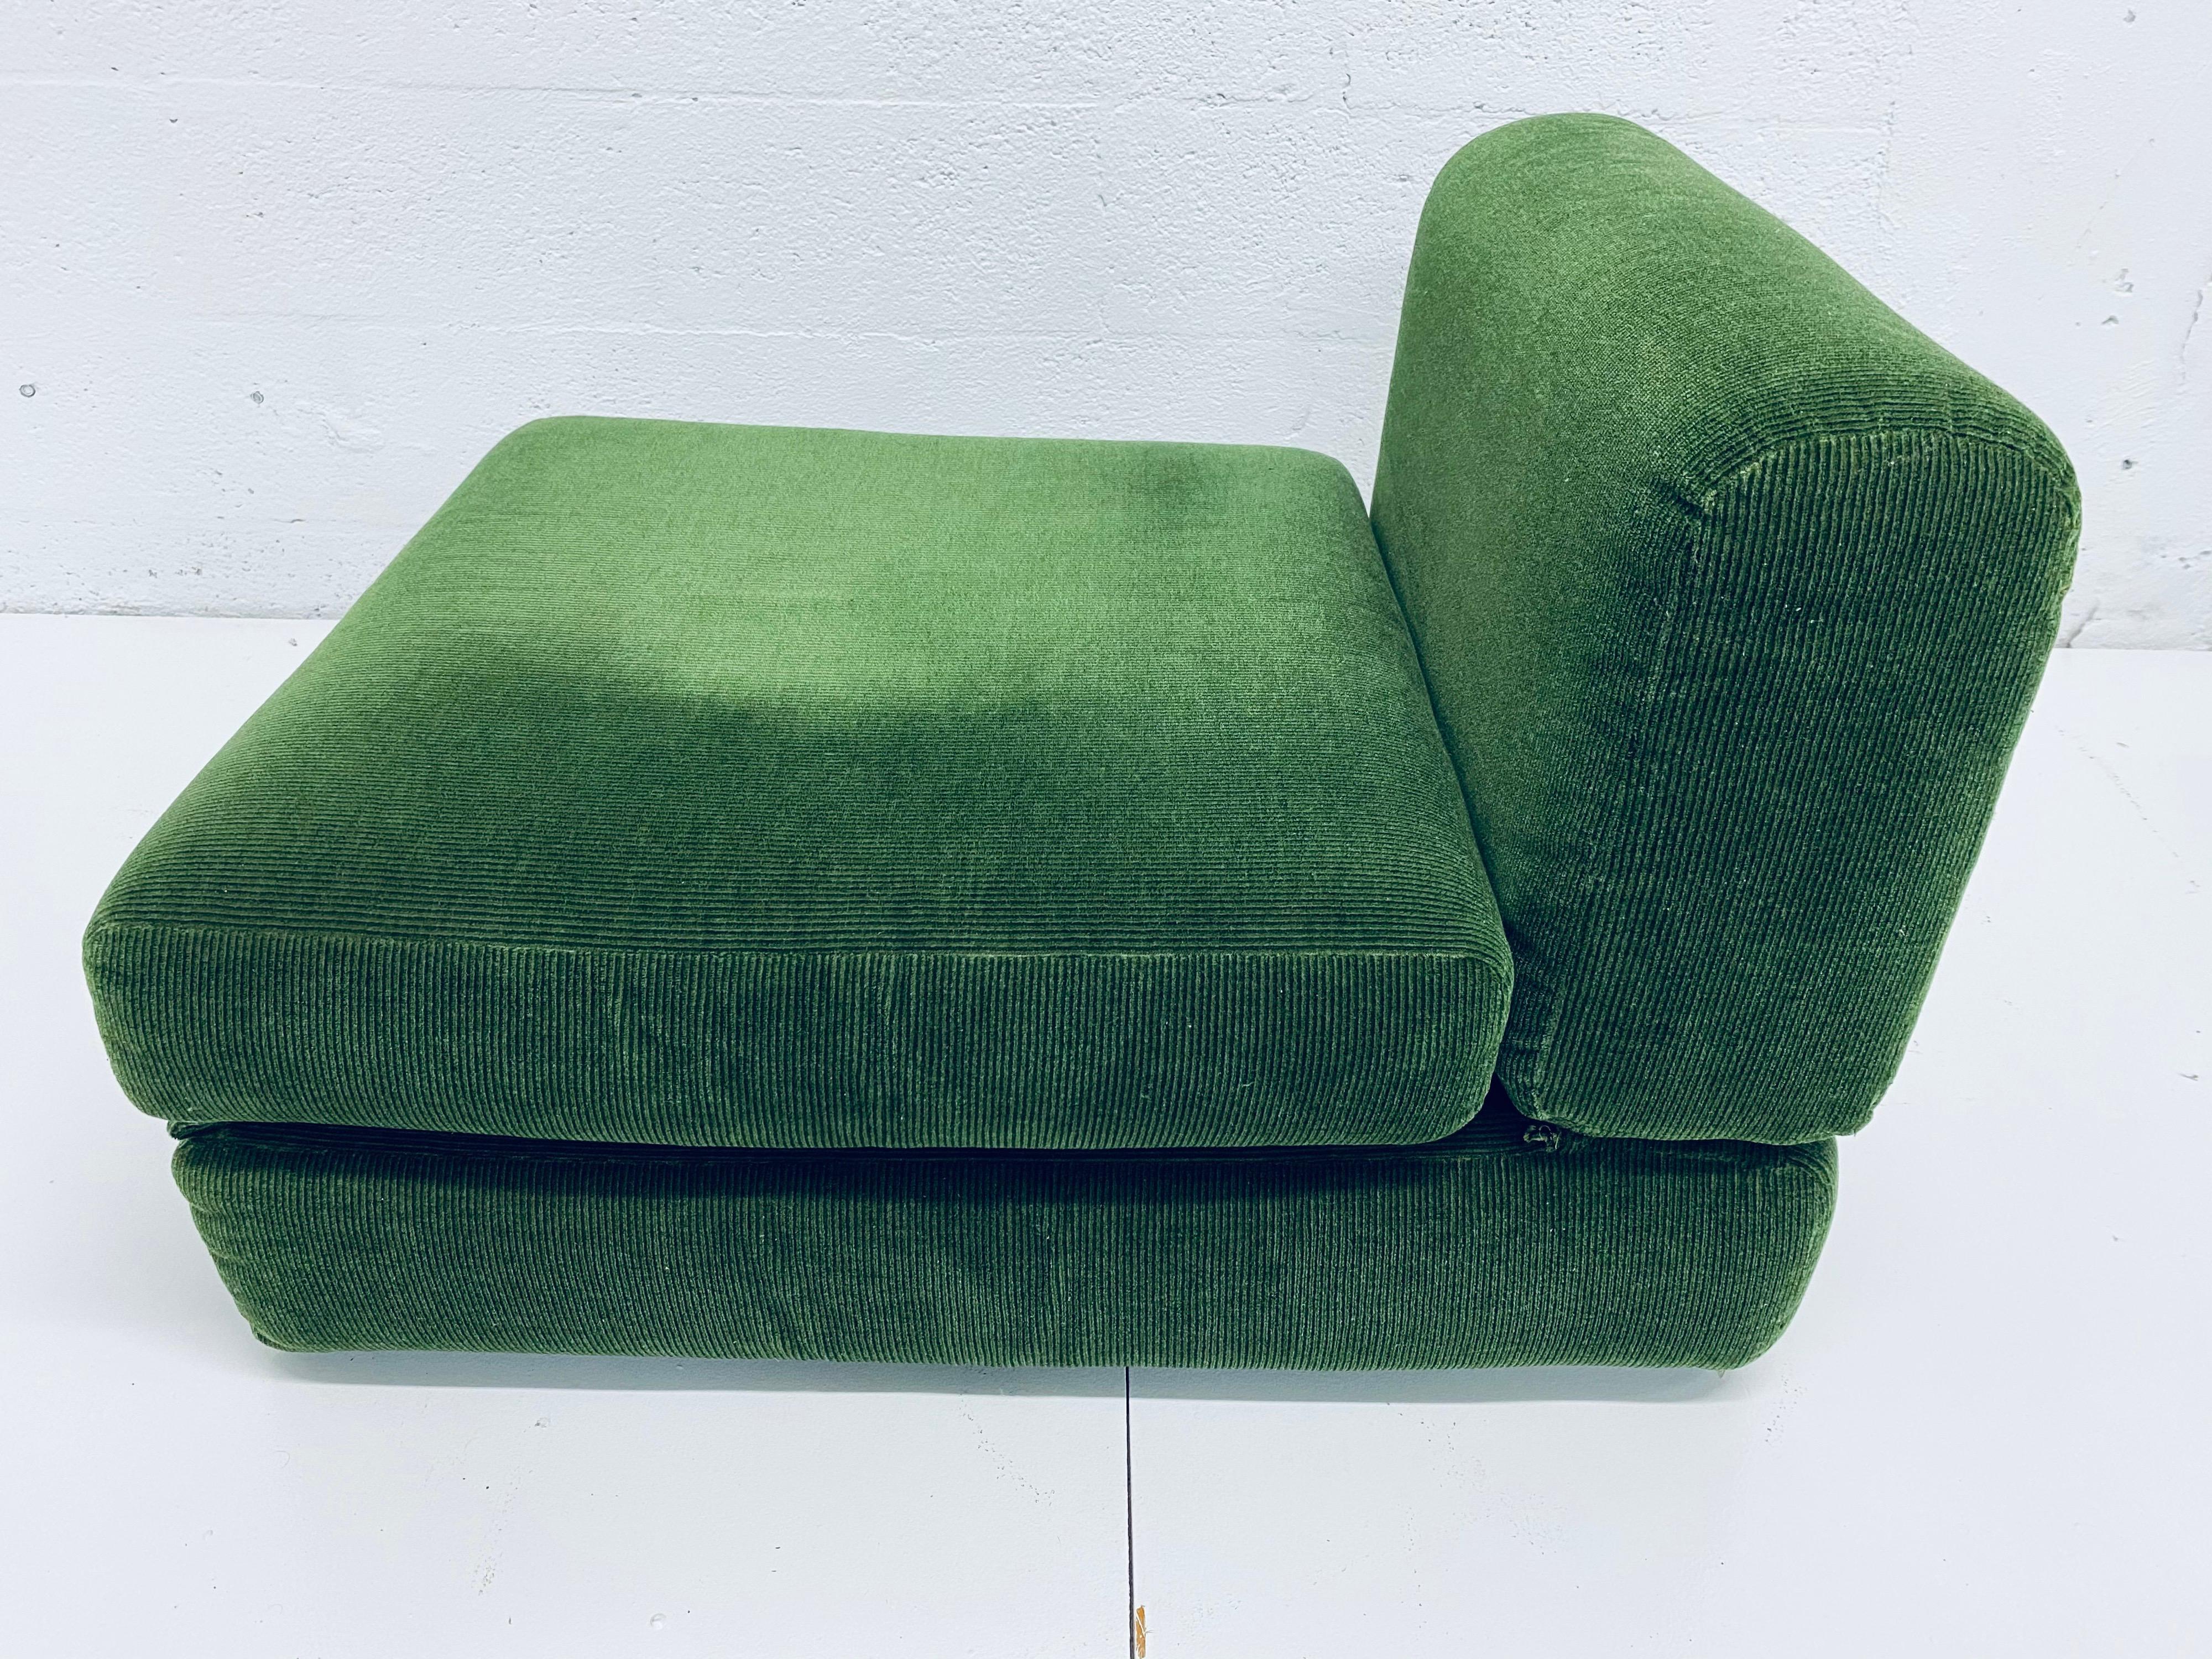 Upholstery Pair of Midcentury Green Corduroy Upholstered Convertible Lounge Chair Daybeds